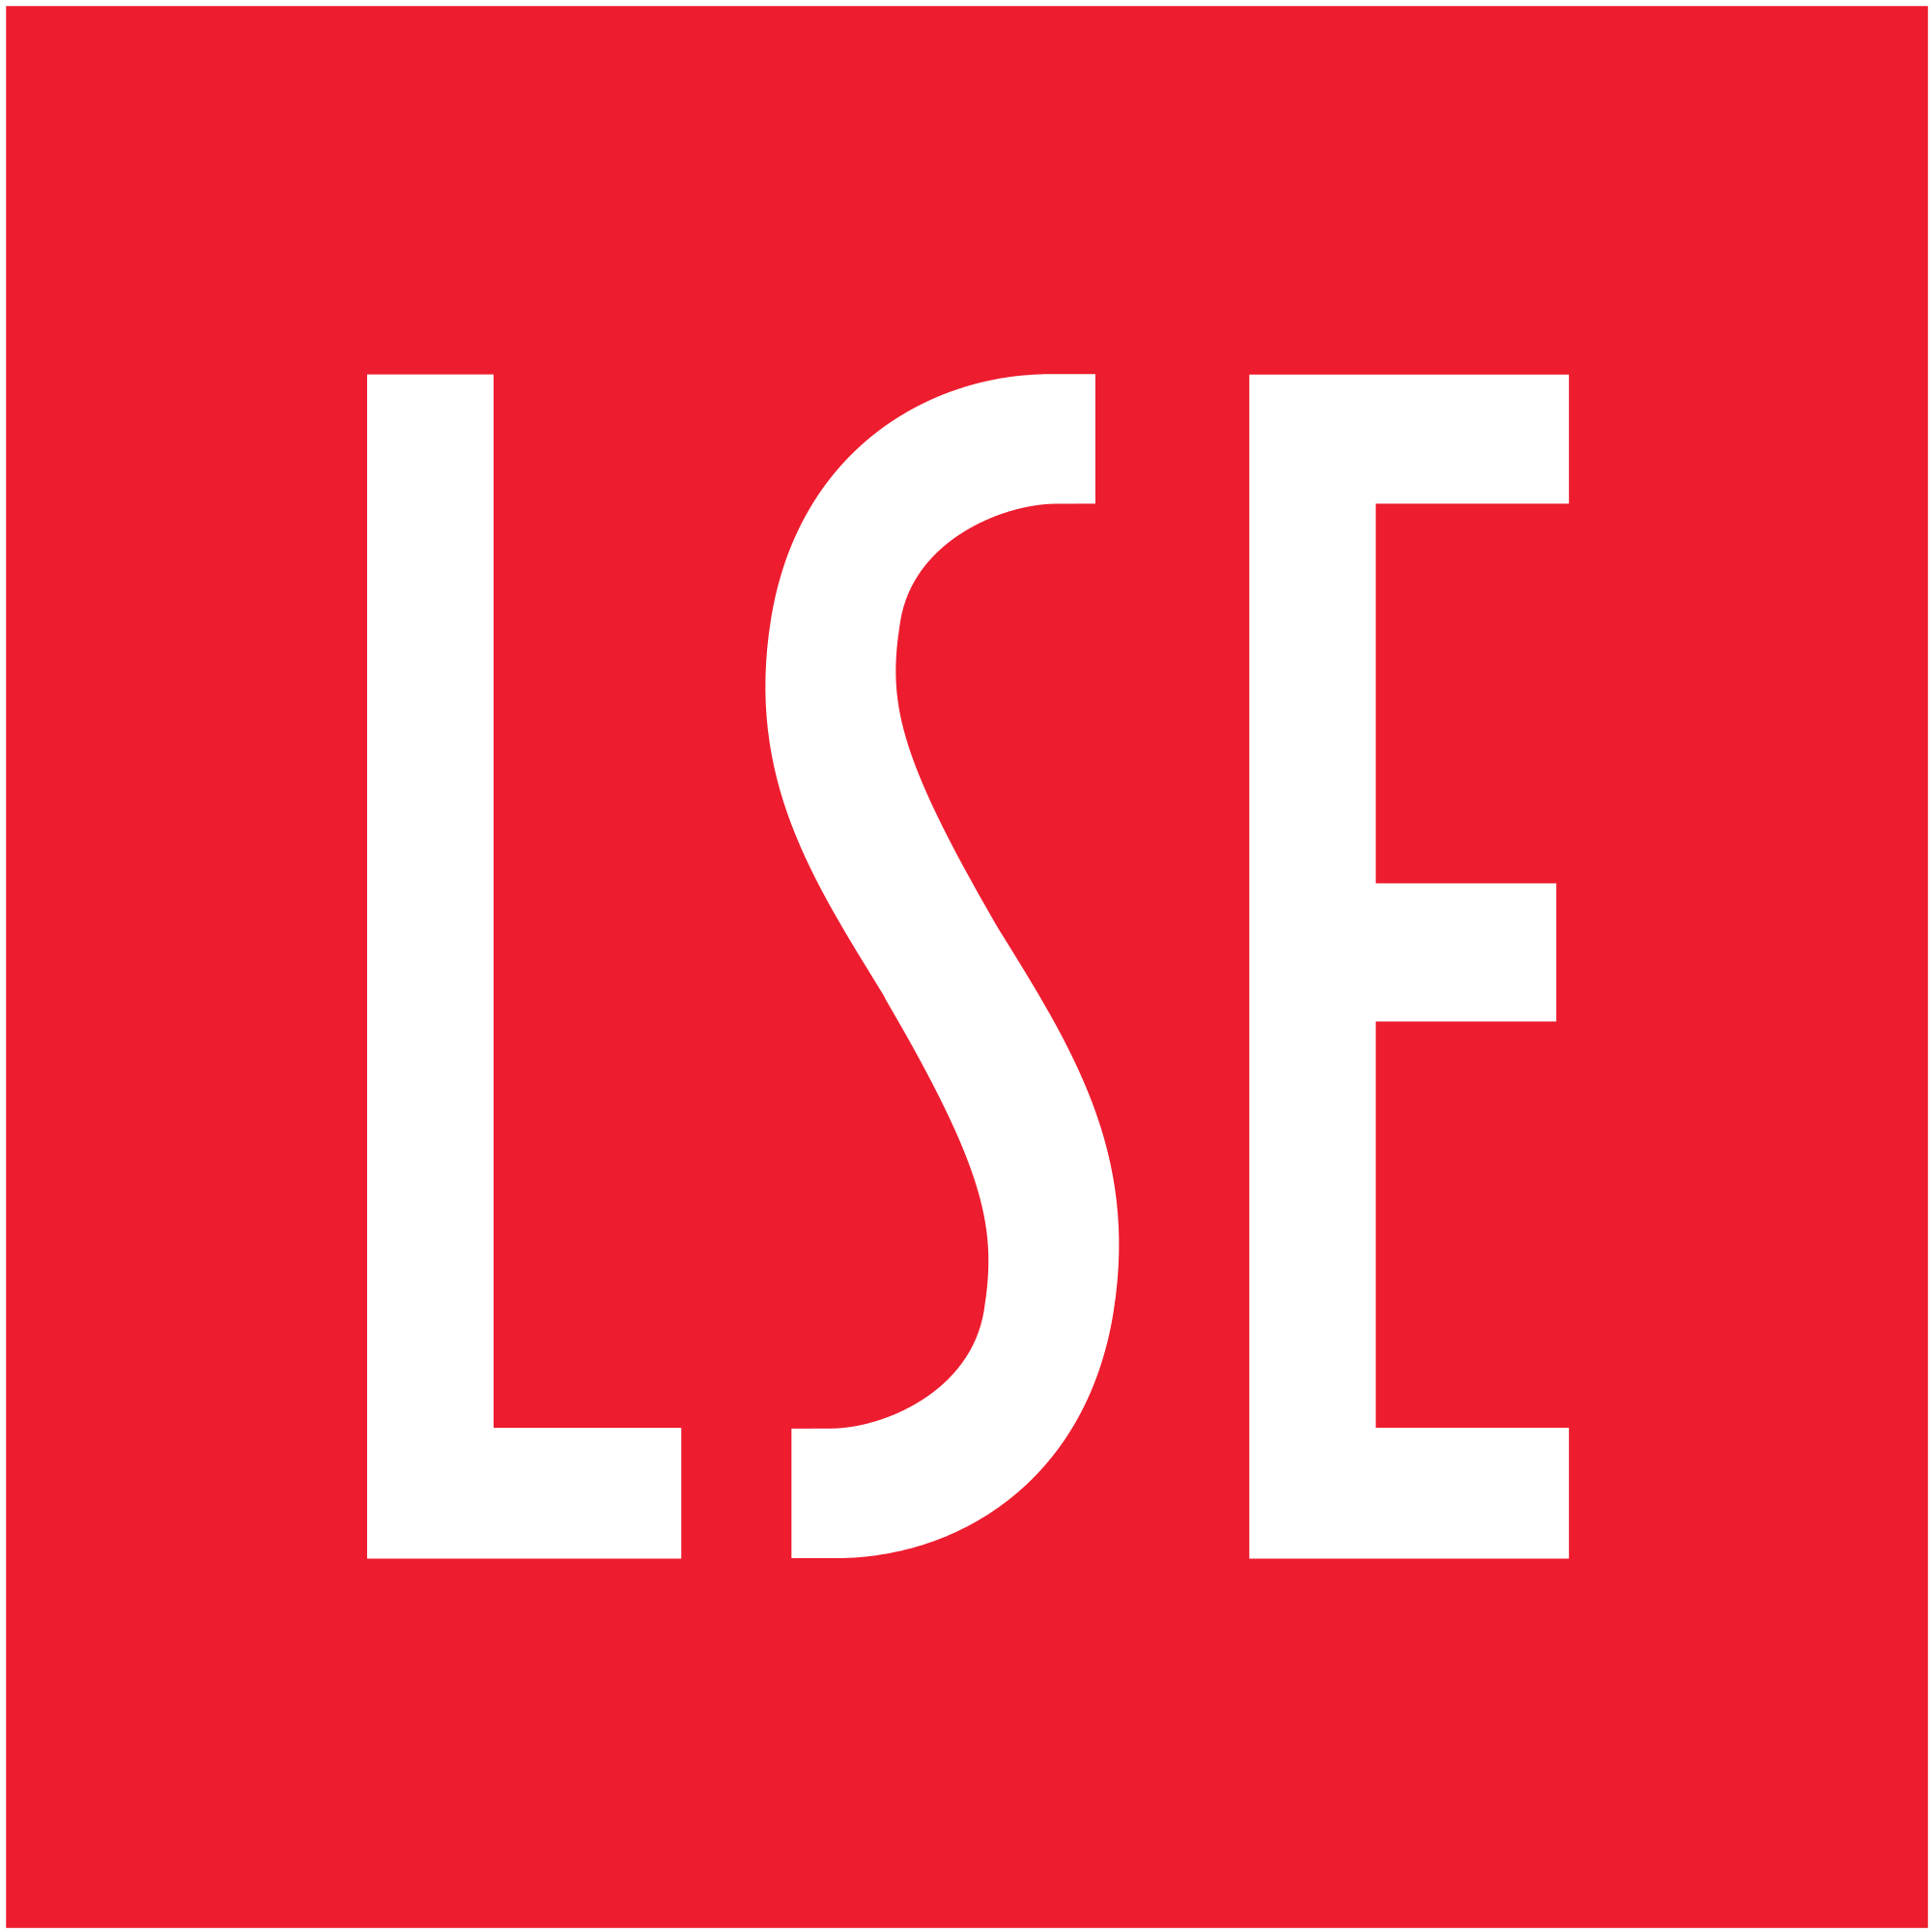 LSE’s Islamic Society holds banquet that separates men and women, IBT, 16 March 2016